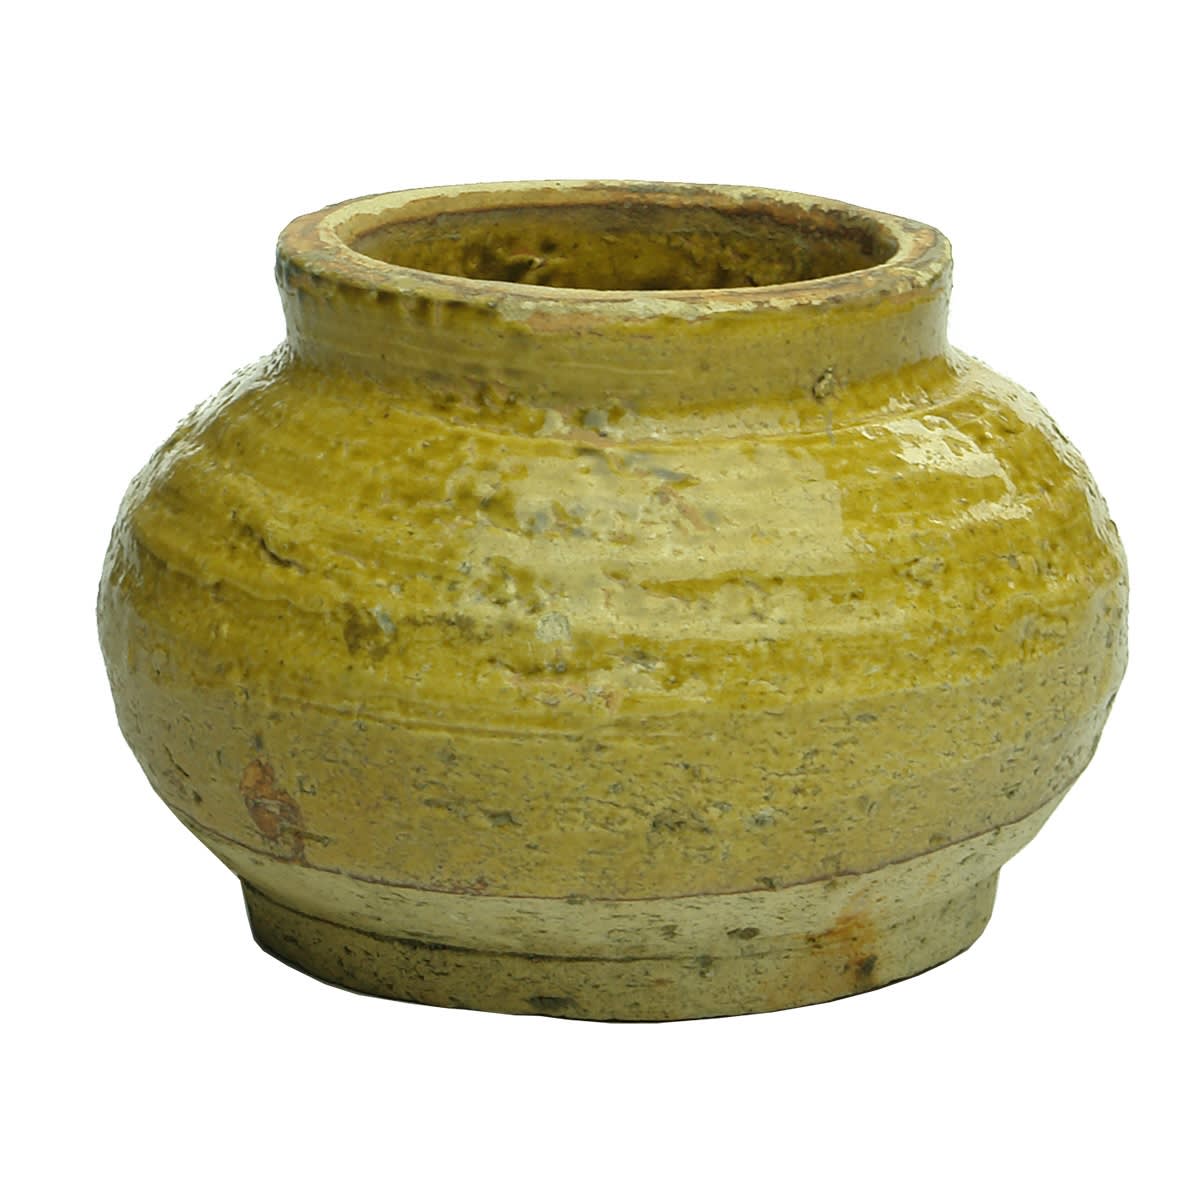 Asian Pottery. Yellow glazed top with unglazed lower half. Small squat pot.